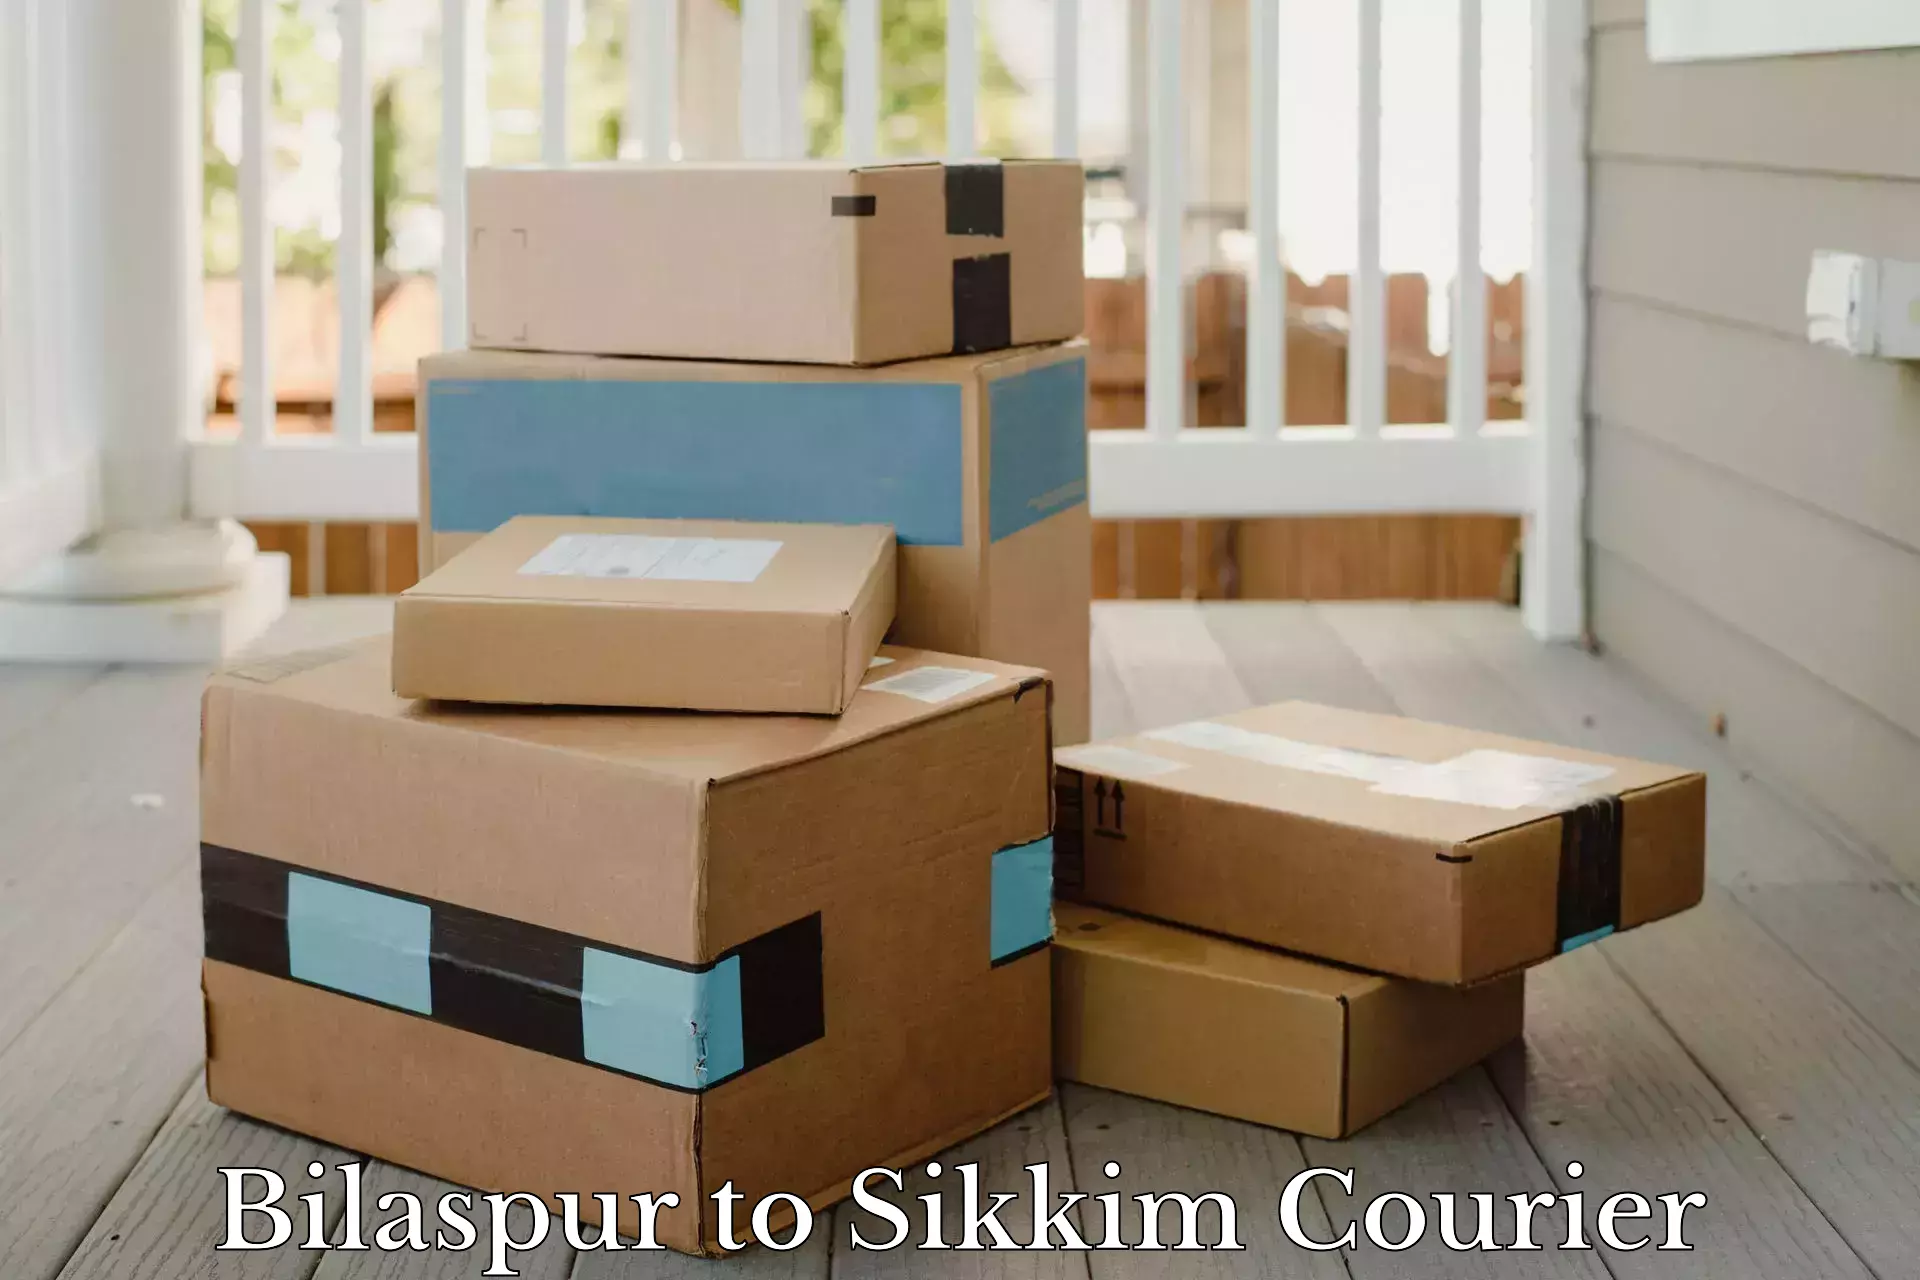 Bulk courier orders Bilaspur to North Sikkim